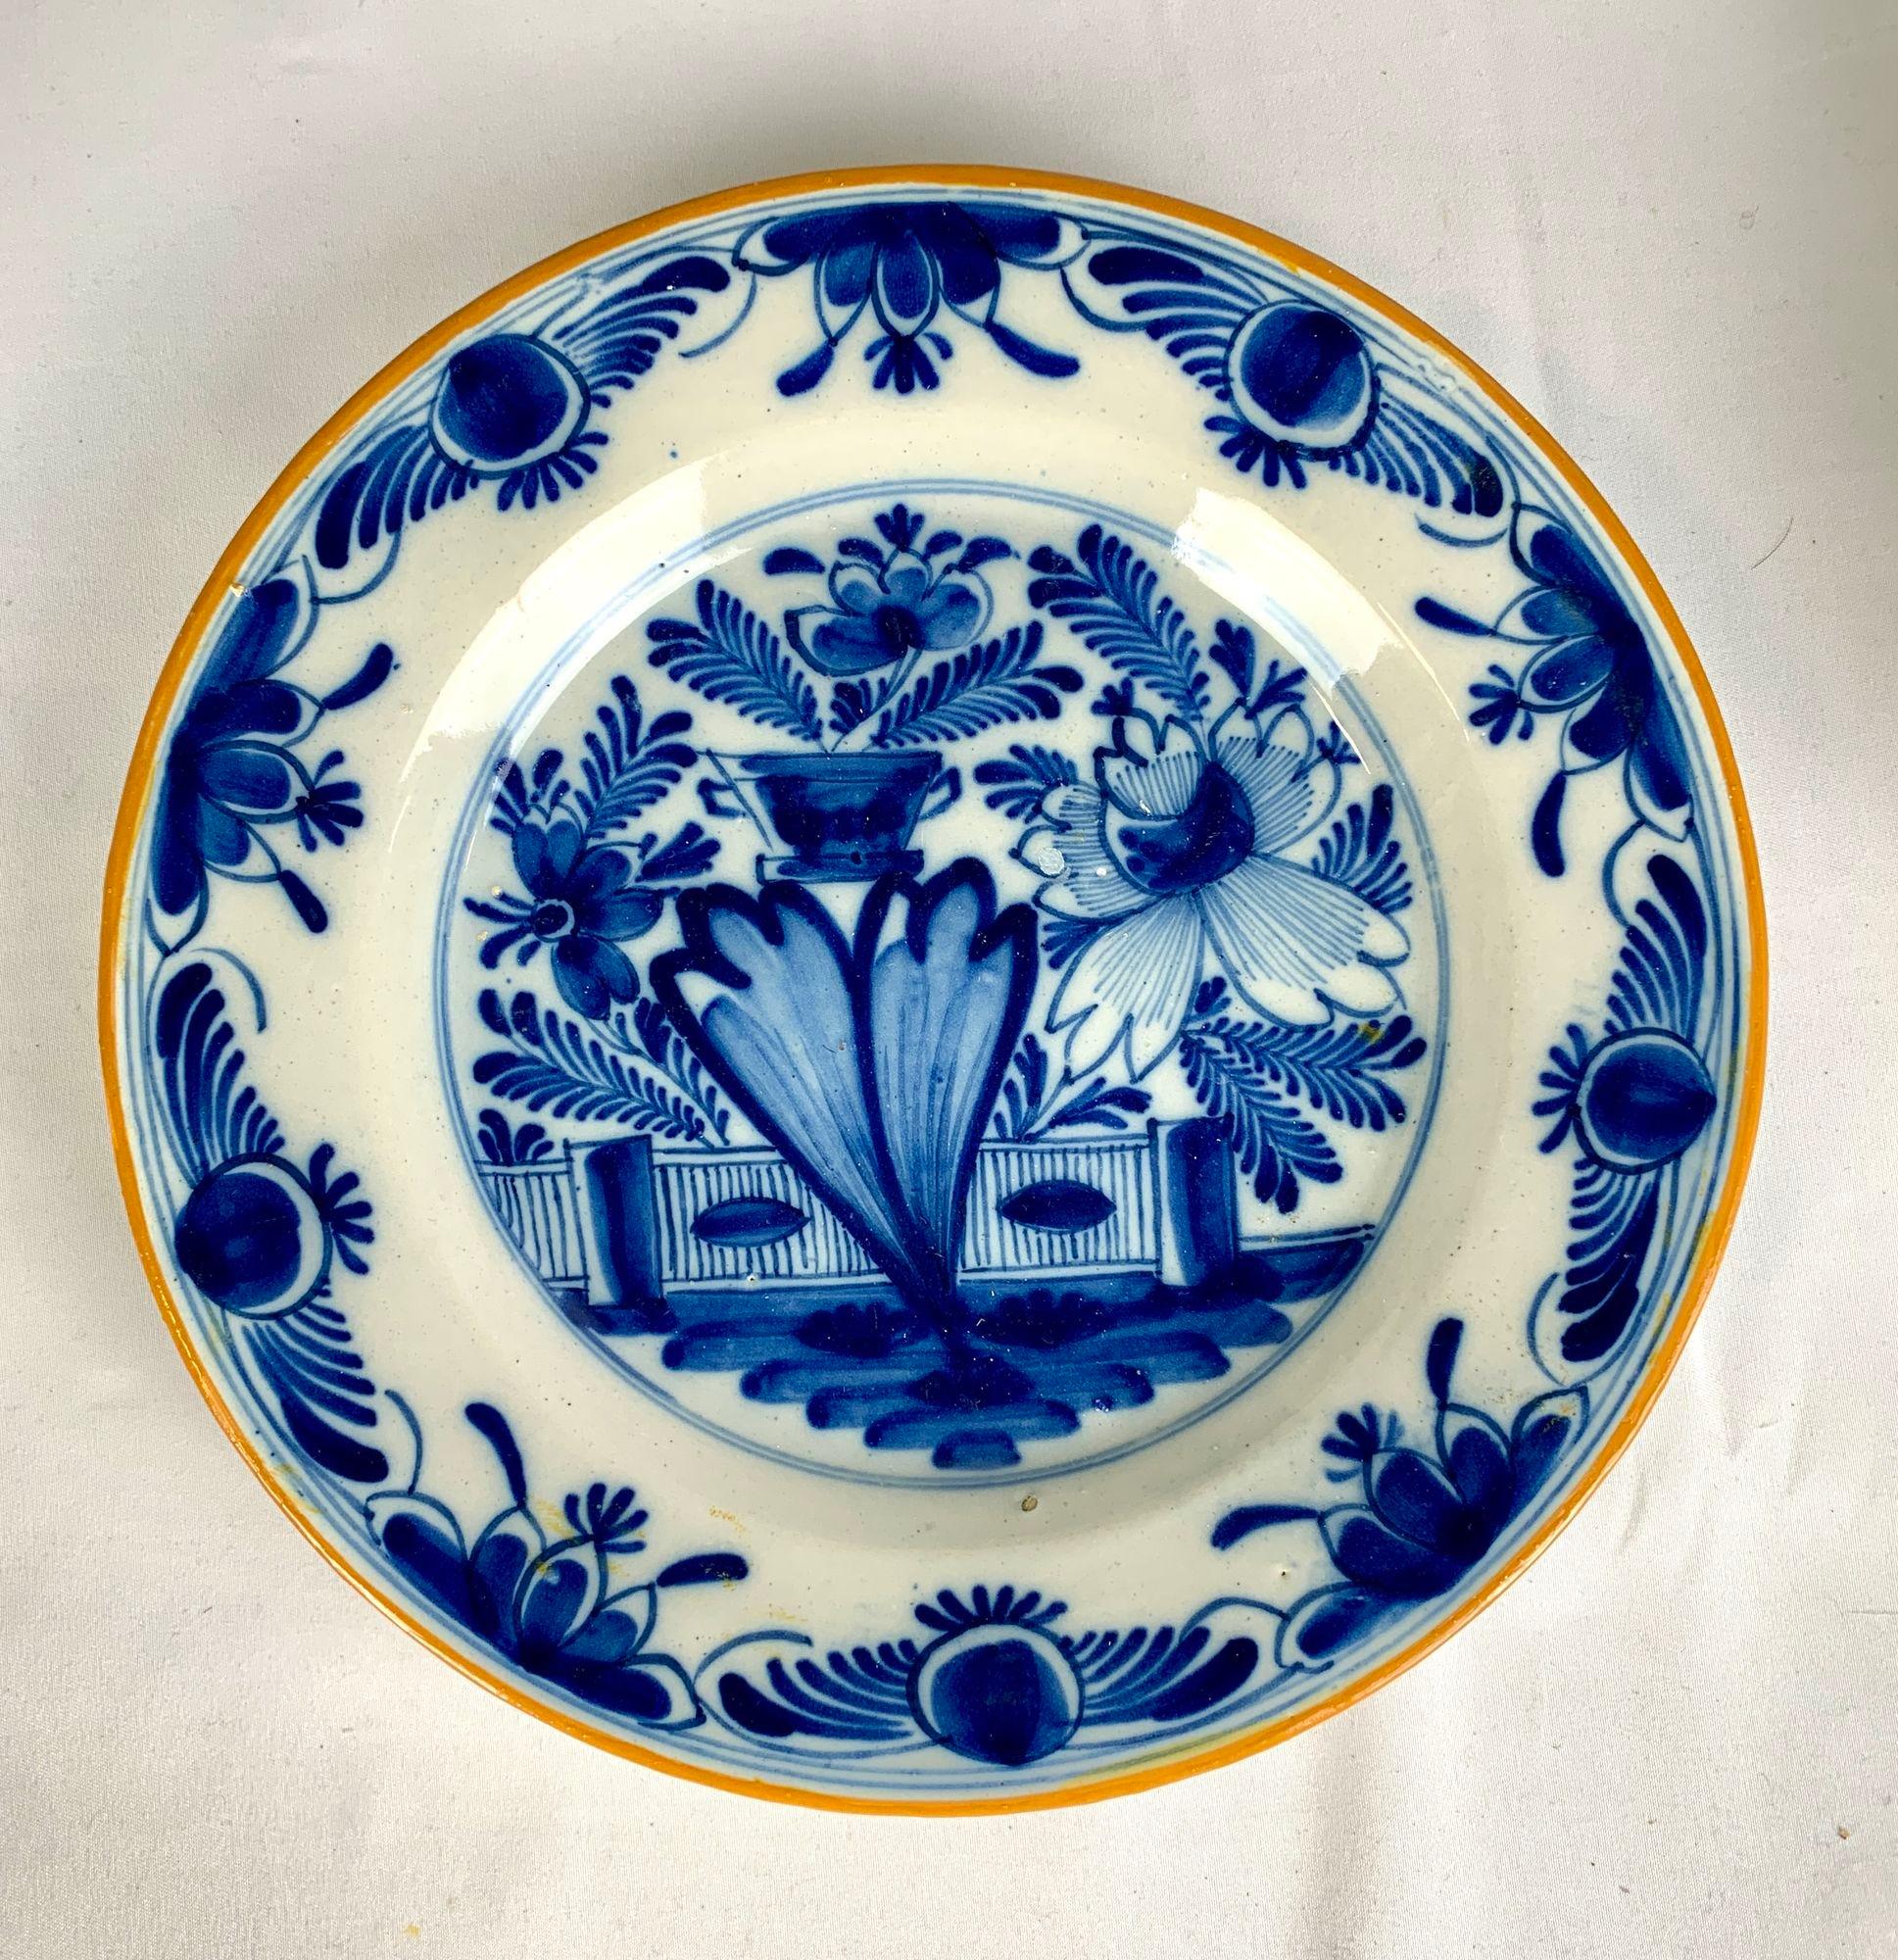 This pair of blue and white Delft plates were hand painted circa 1800 in the Netherlands.
At the center of this lovely pair of dishes is a traditional Dutch Delft view of a garden in full bloom.
We see flowers, ferns, vines, one large peony, a